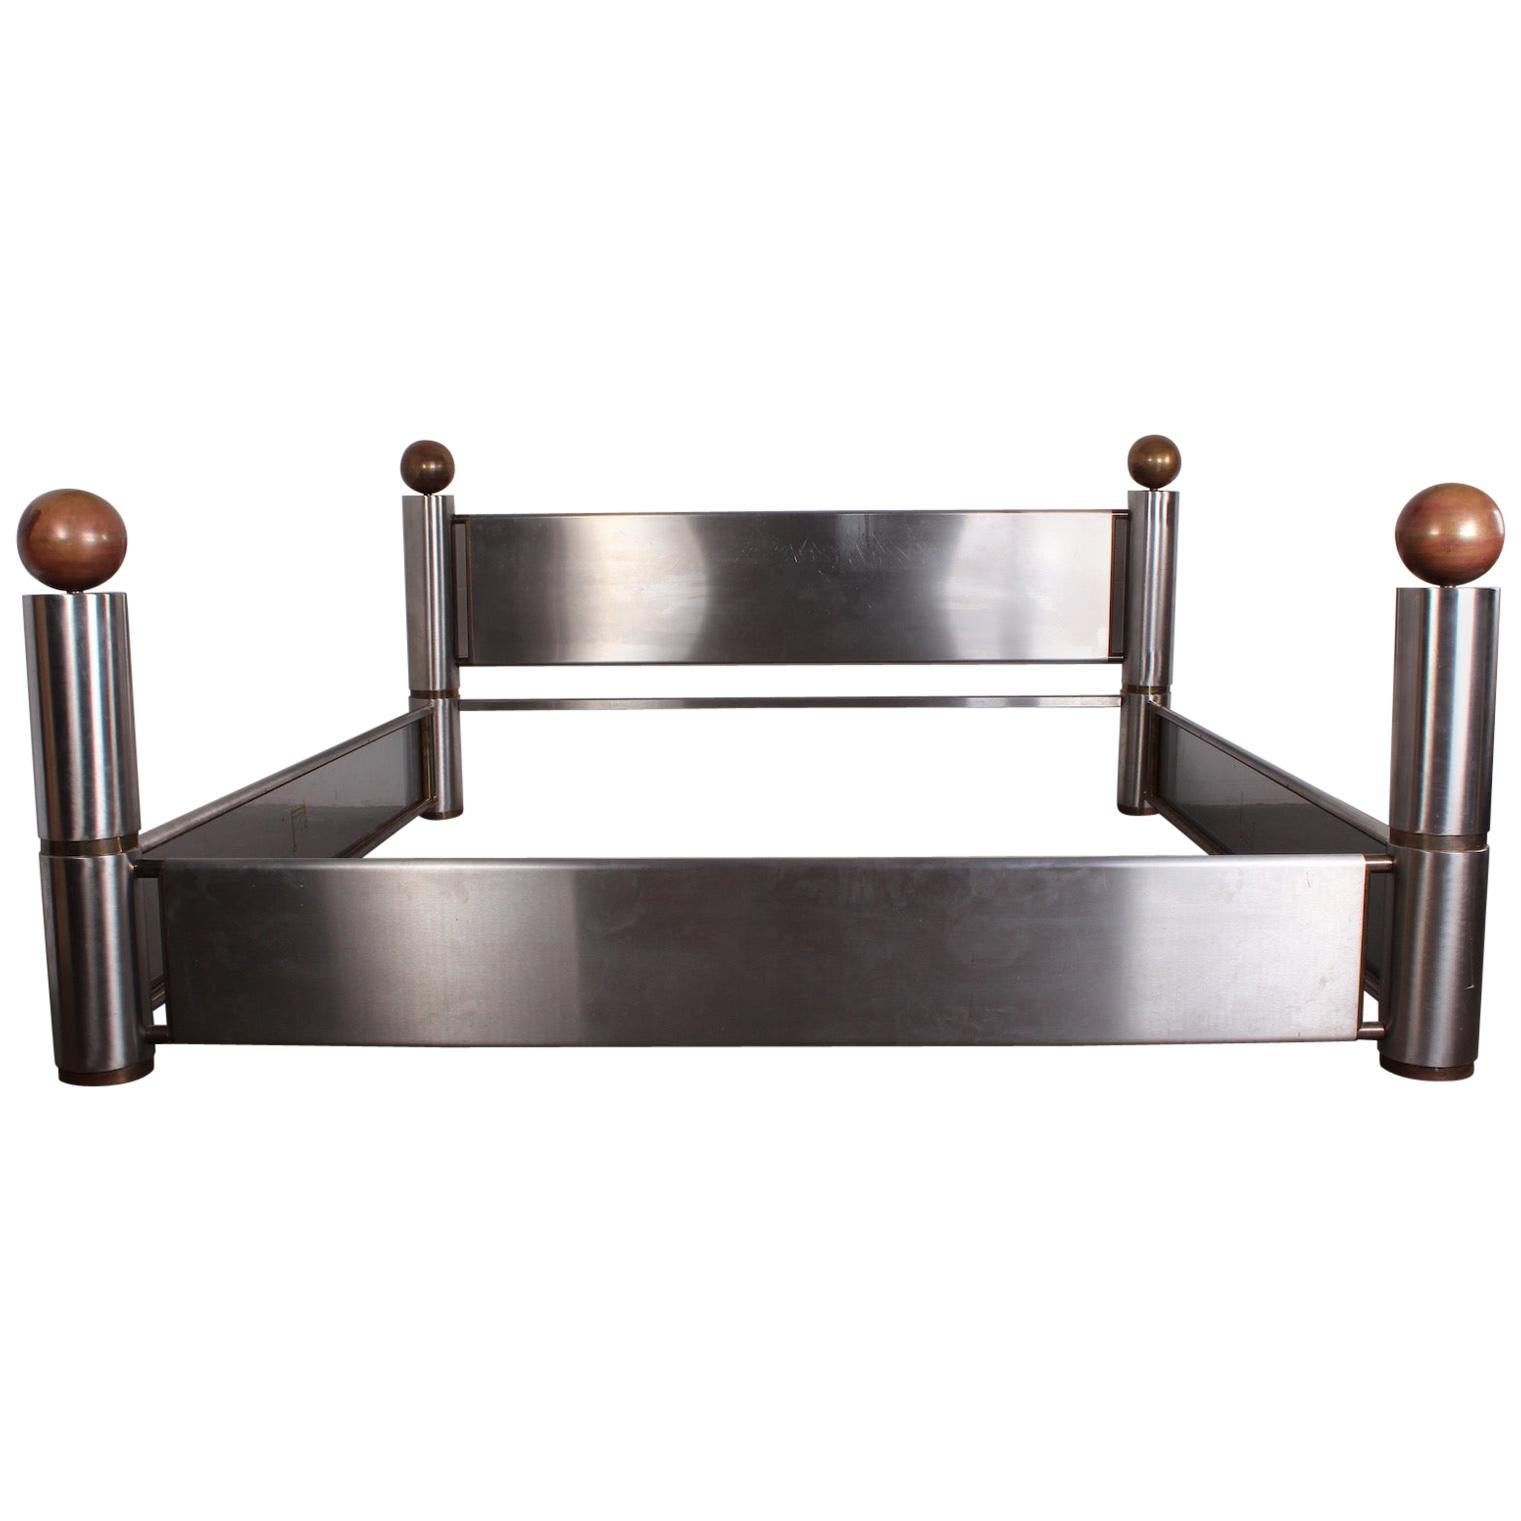 Stainless Steel and Brass Bed